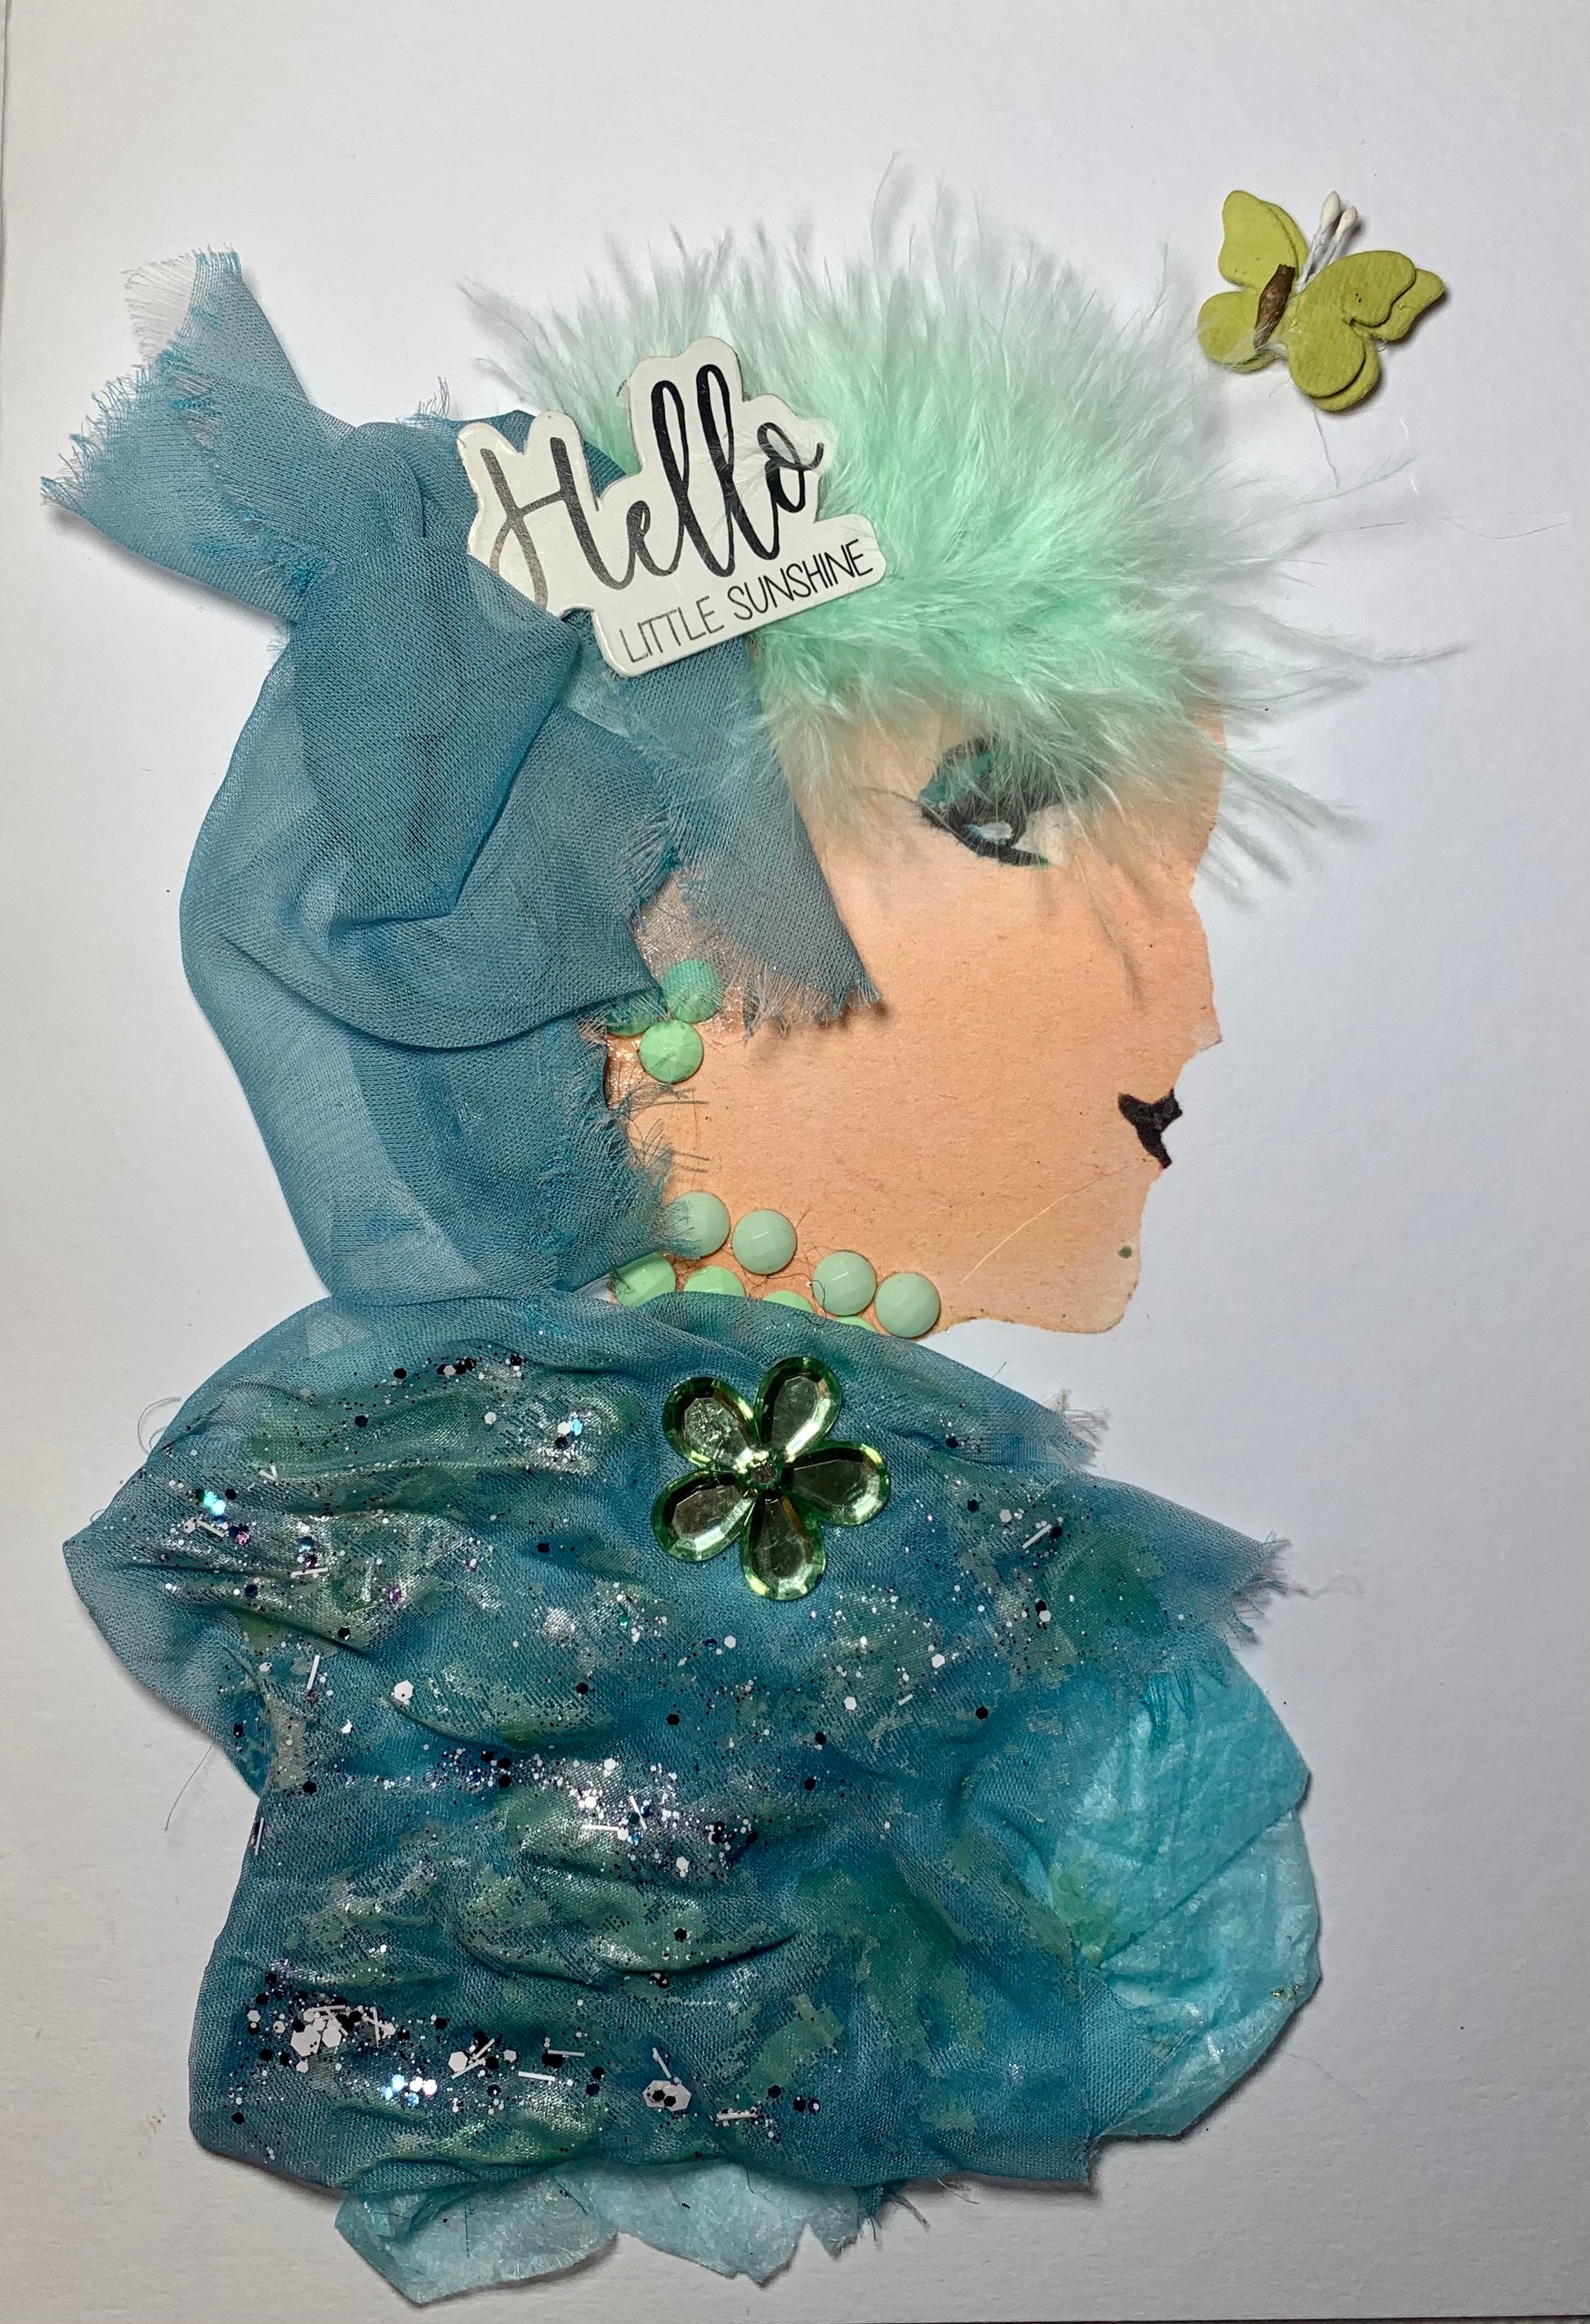 This card shows a woman wearing a blue blouse and headscarf which is dazzling with sparkles. She has a quote nestled into her green feathery hair that says "Hello Little Sunshine" and there is a lime green butterfly on the top right hand side. Her jewellery is also lime green.  A great card  to cheer yourself or someone up .